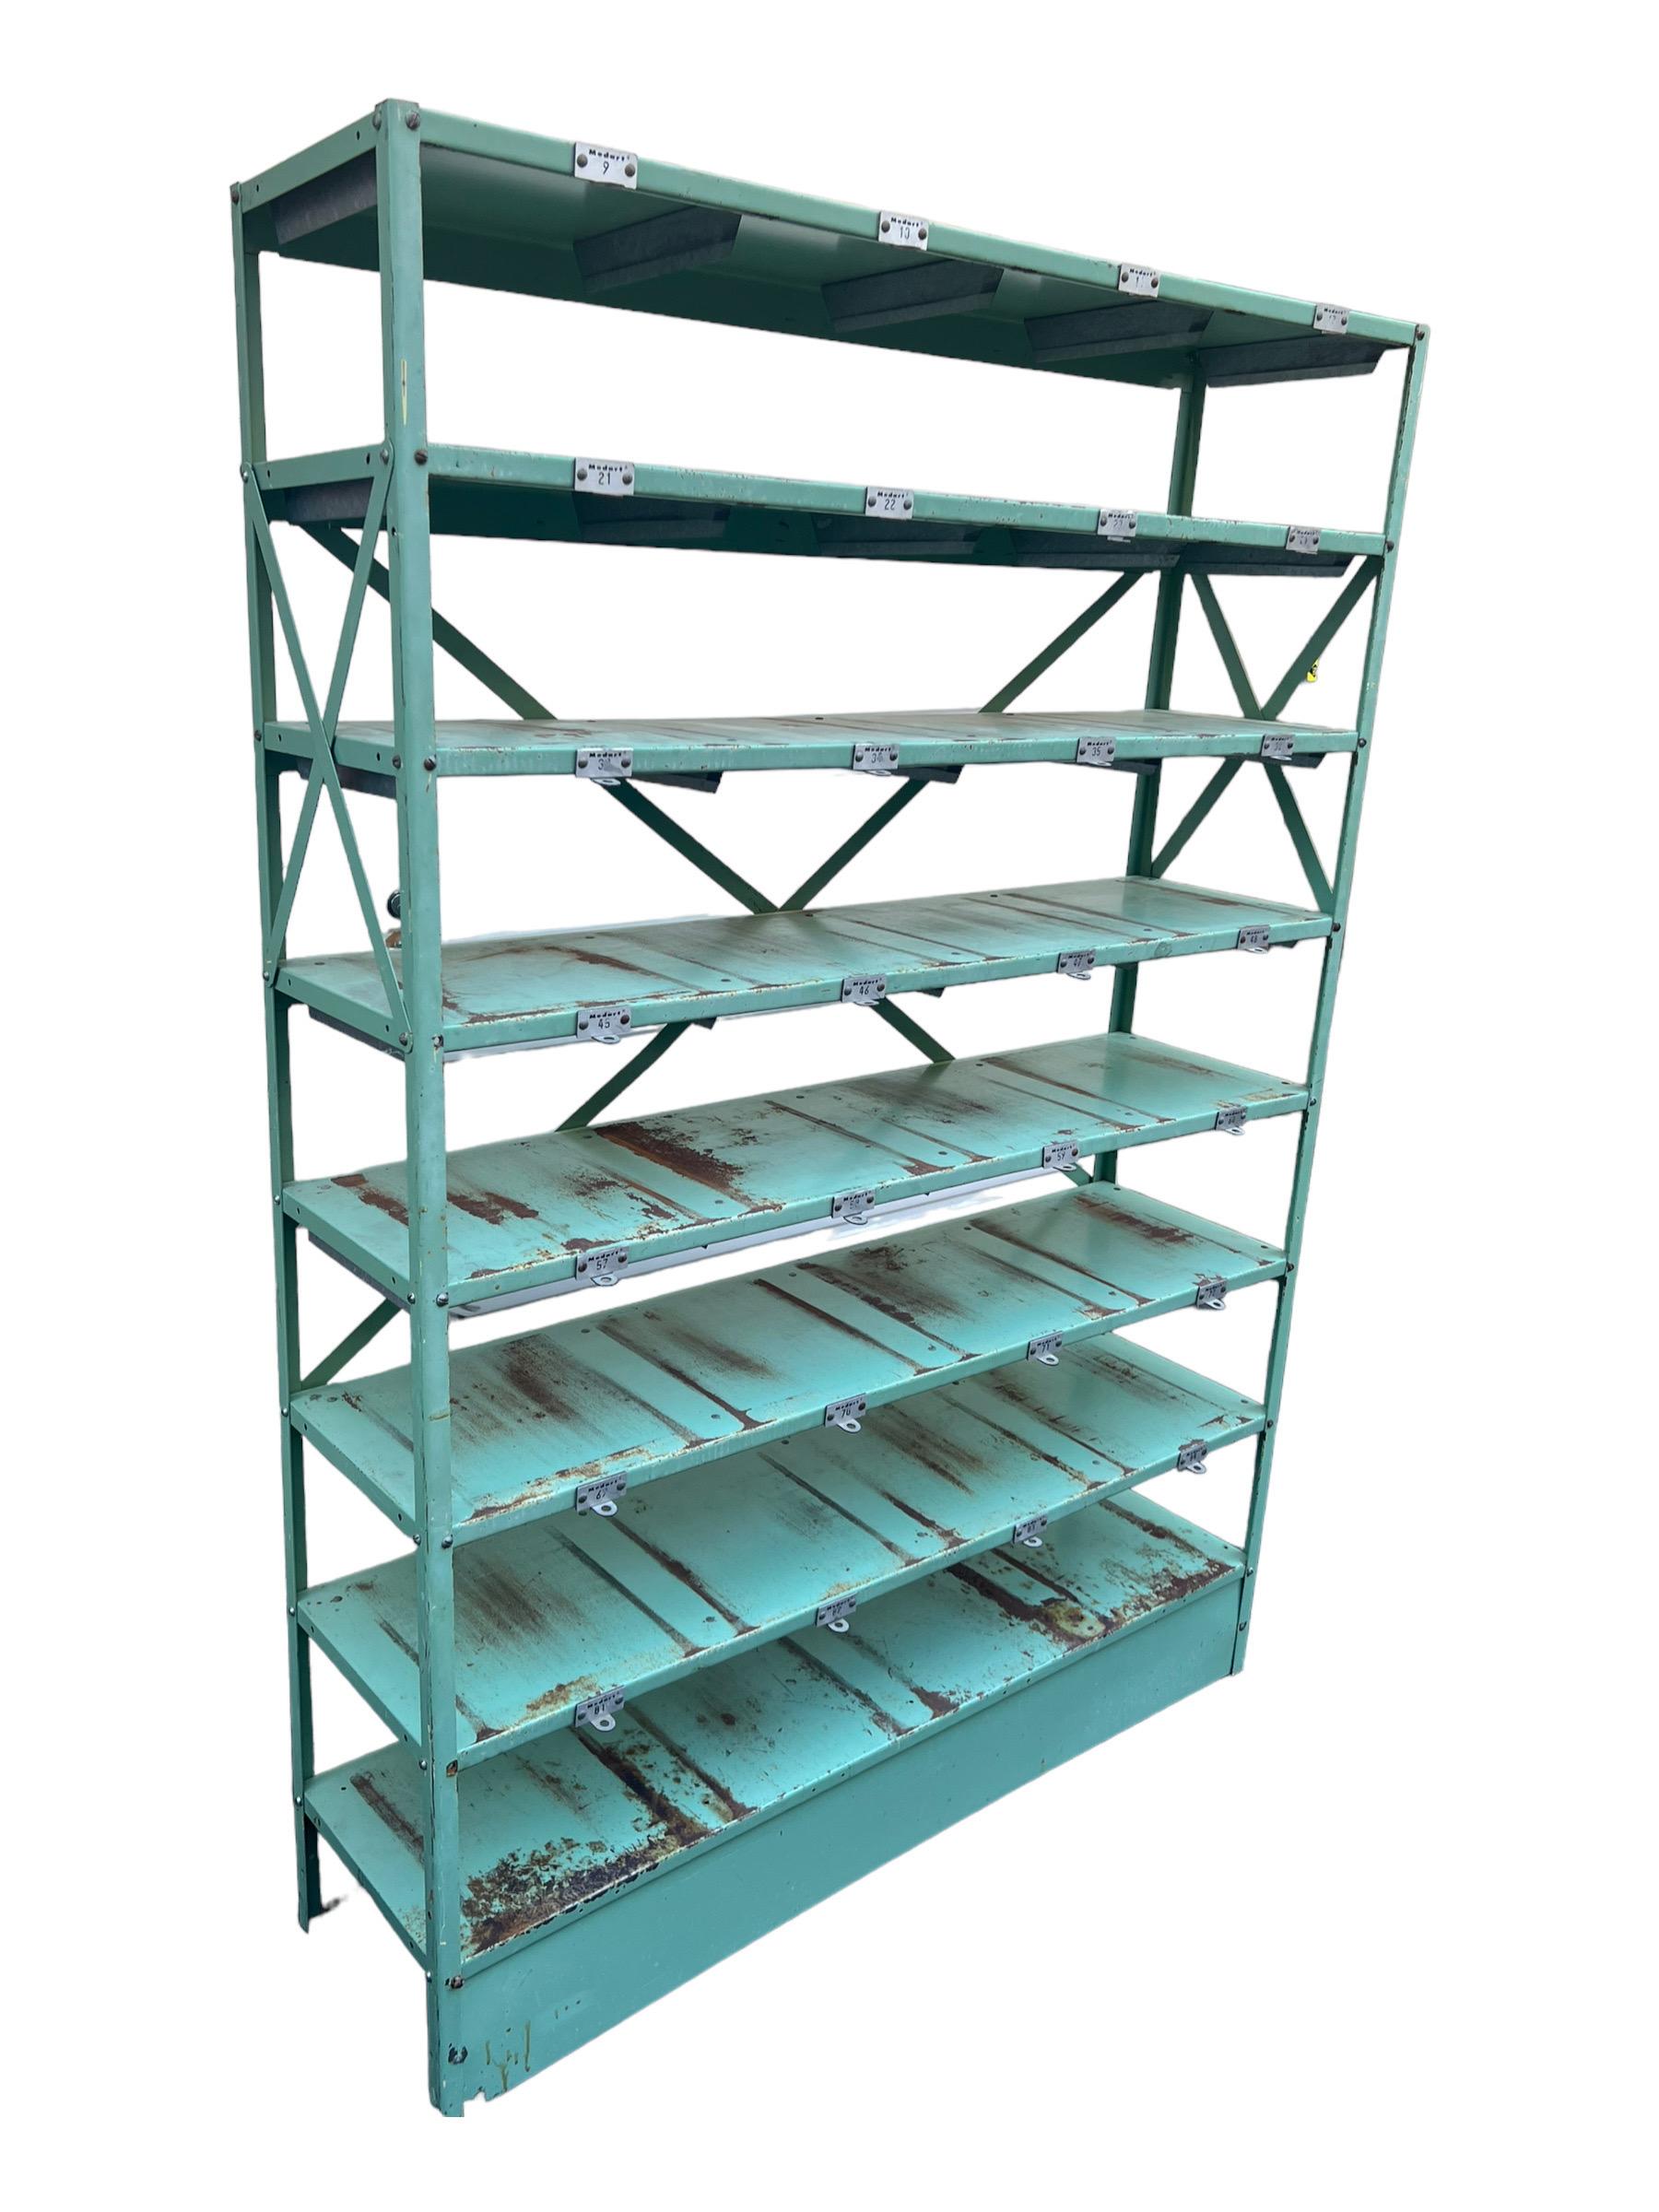 Late 20th Century Vintage American Industrial Freestanding Bookshelf or Shelving Wall Unit  For Sale